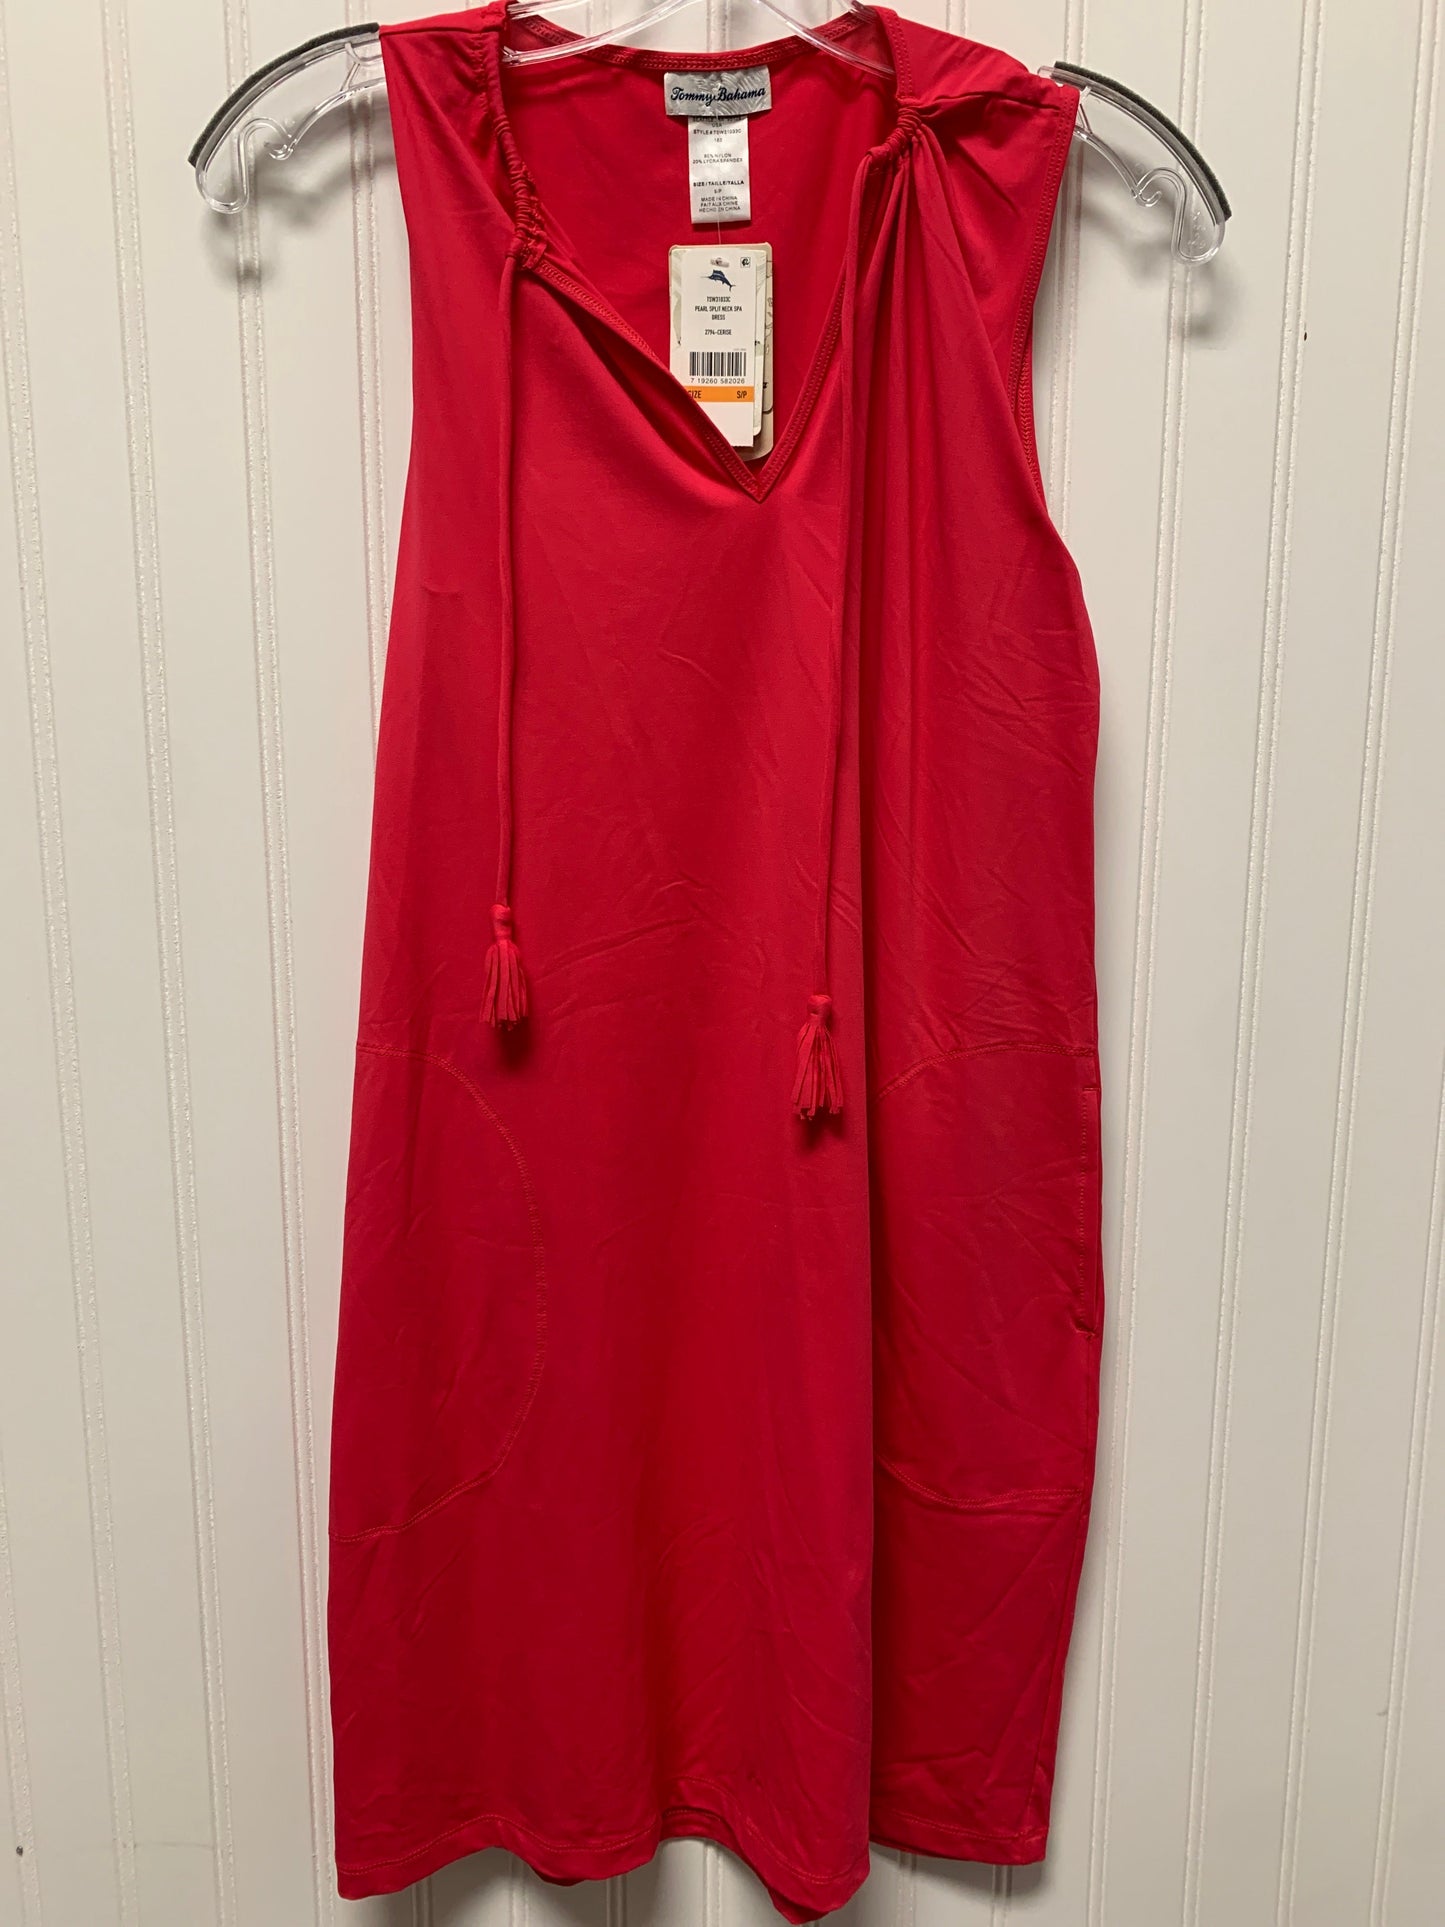 Pink Dress Casual Short Tommy Bahama, Size Petite   S